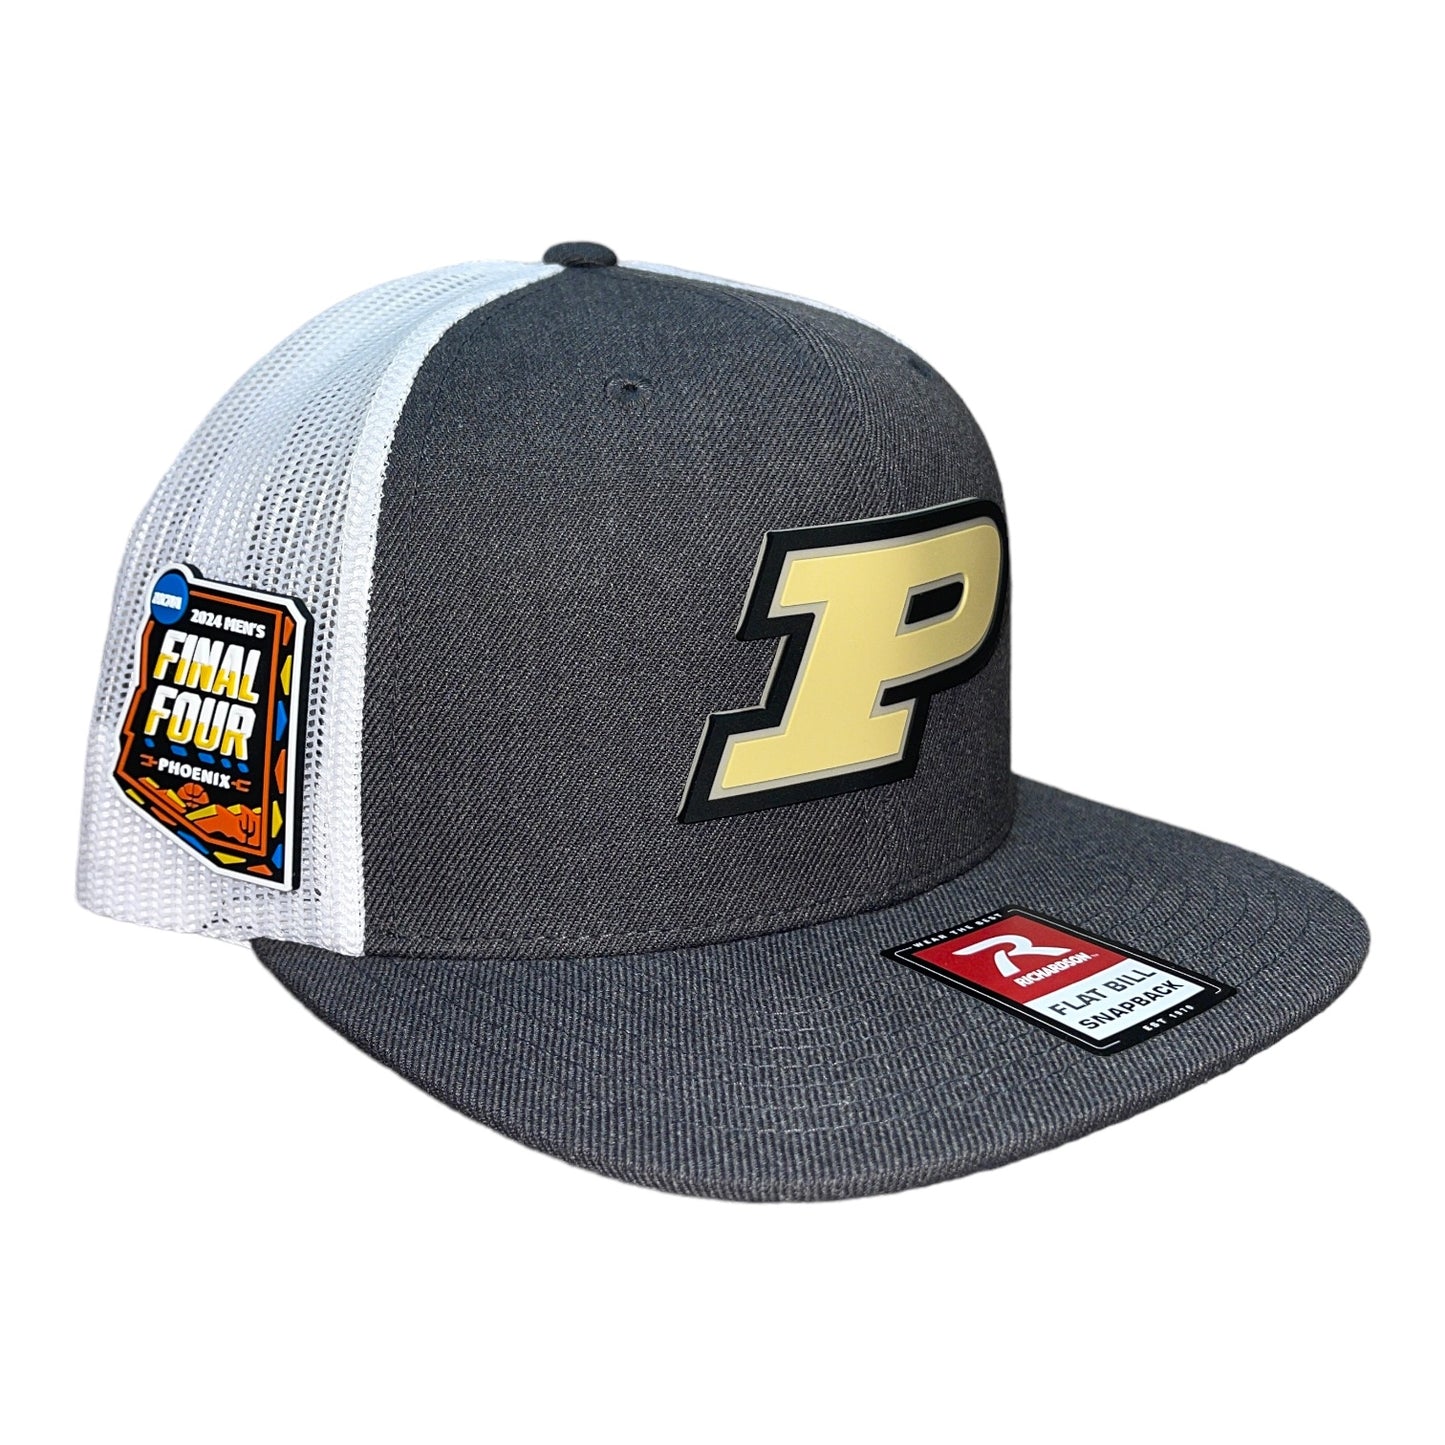 Purdue Boilermakers 2024 Final Four 3D Wool Blend Flat Bill Hat- Heather Charcoal/ White